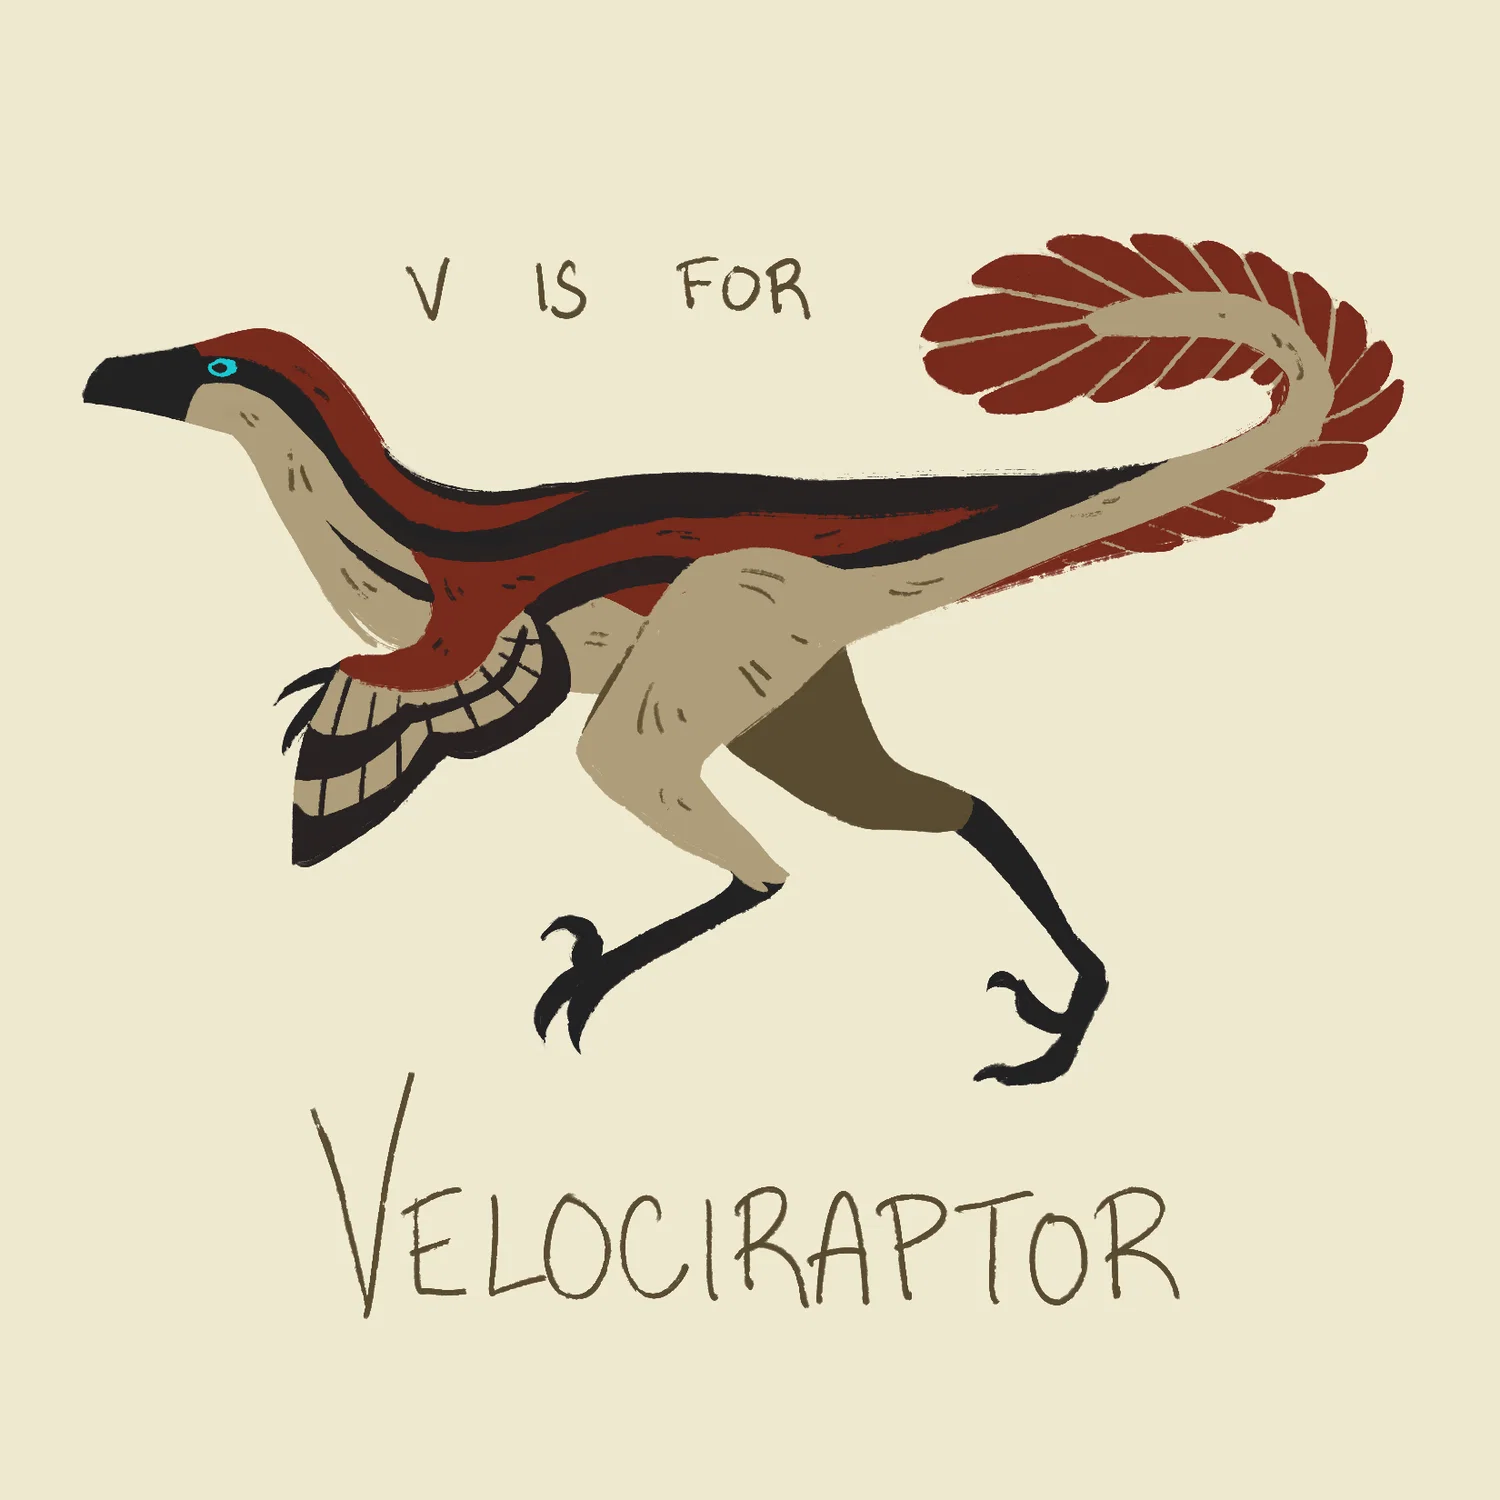 An illustration of a feathered Velociraptor in a simple lineless style. Handwritten text on the image reads "V is for Velociraptor."